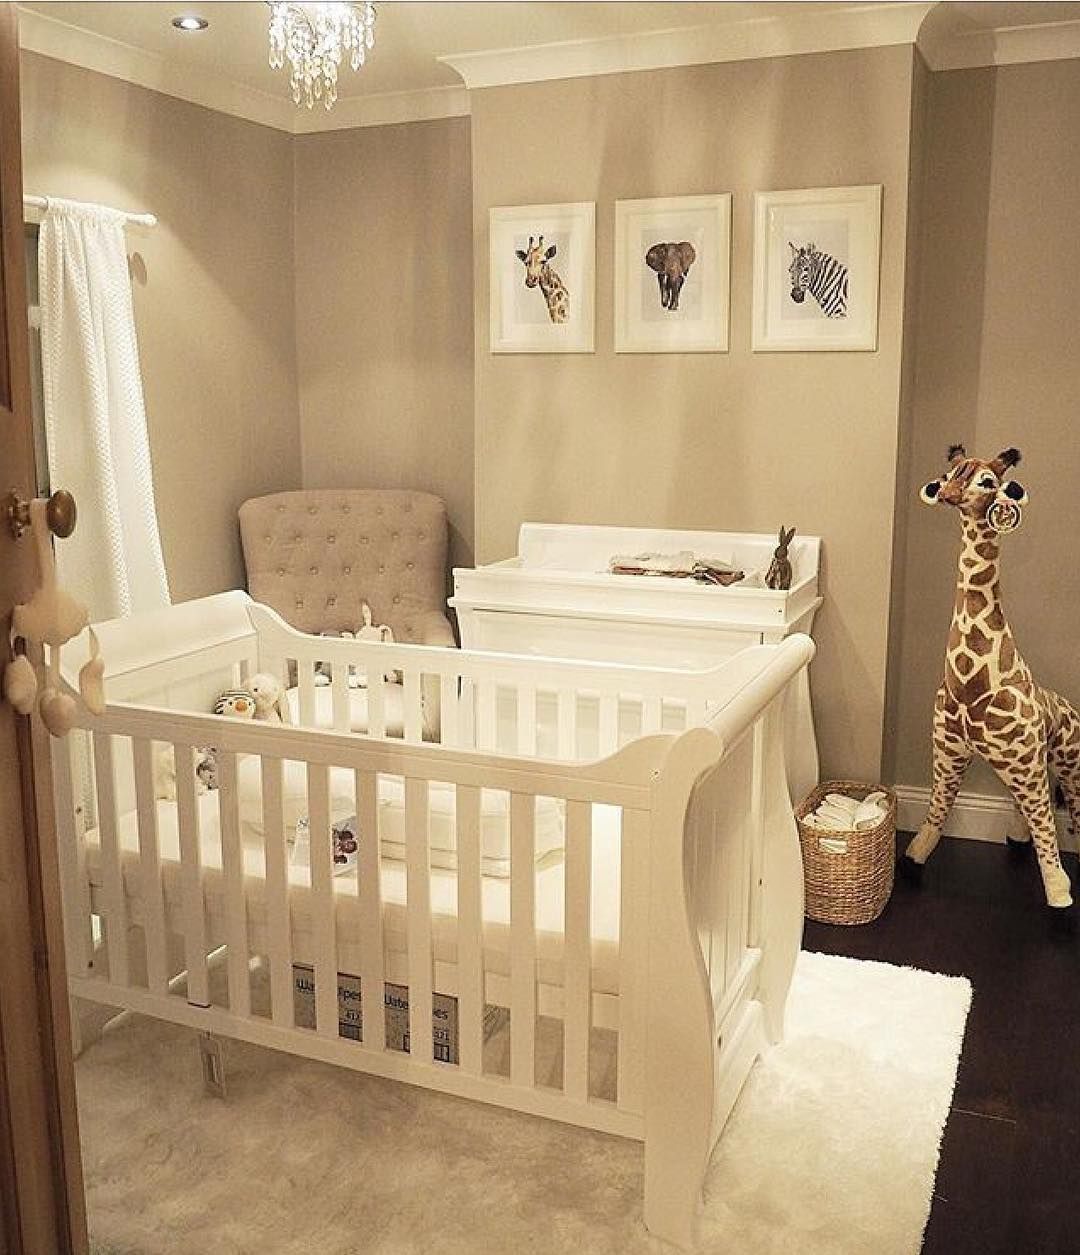 Boori Europe on Instagram: “A simple yet effective gender neutral nursery! How stunning are the animal prints? Perfect to complement our Boori Sleigh cot bed and…”